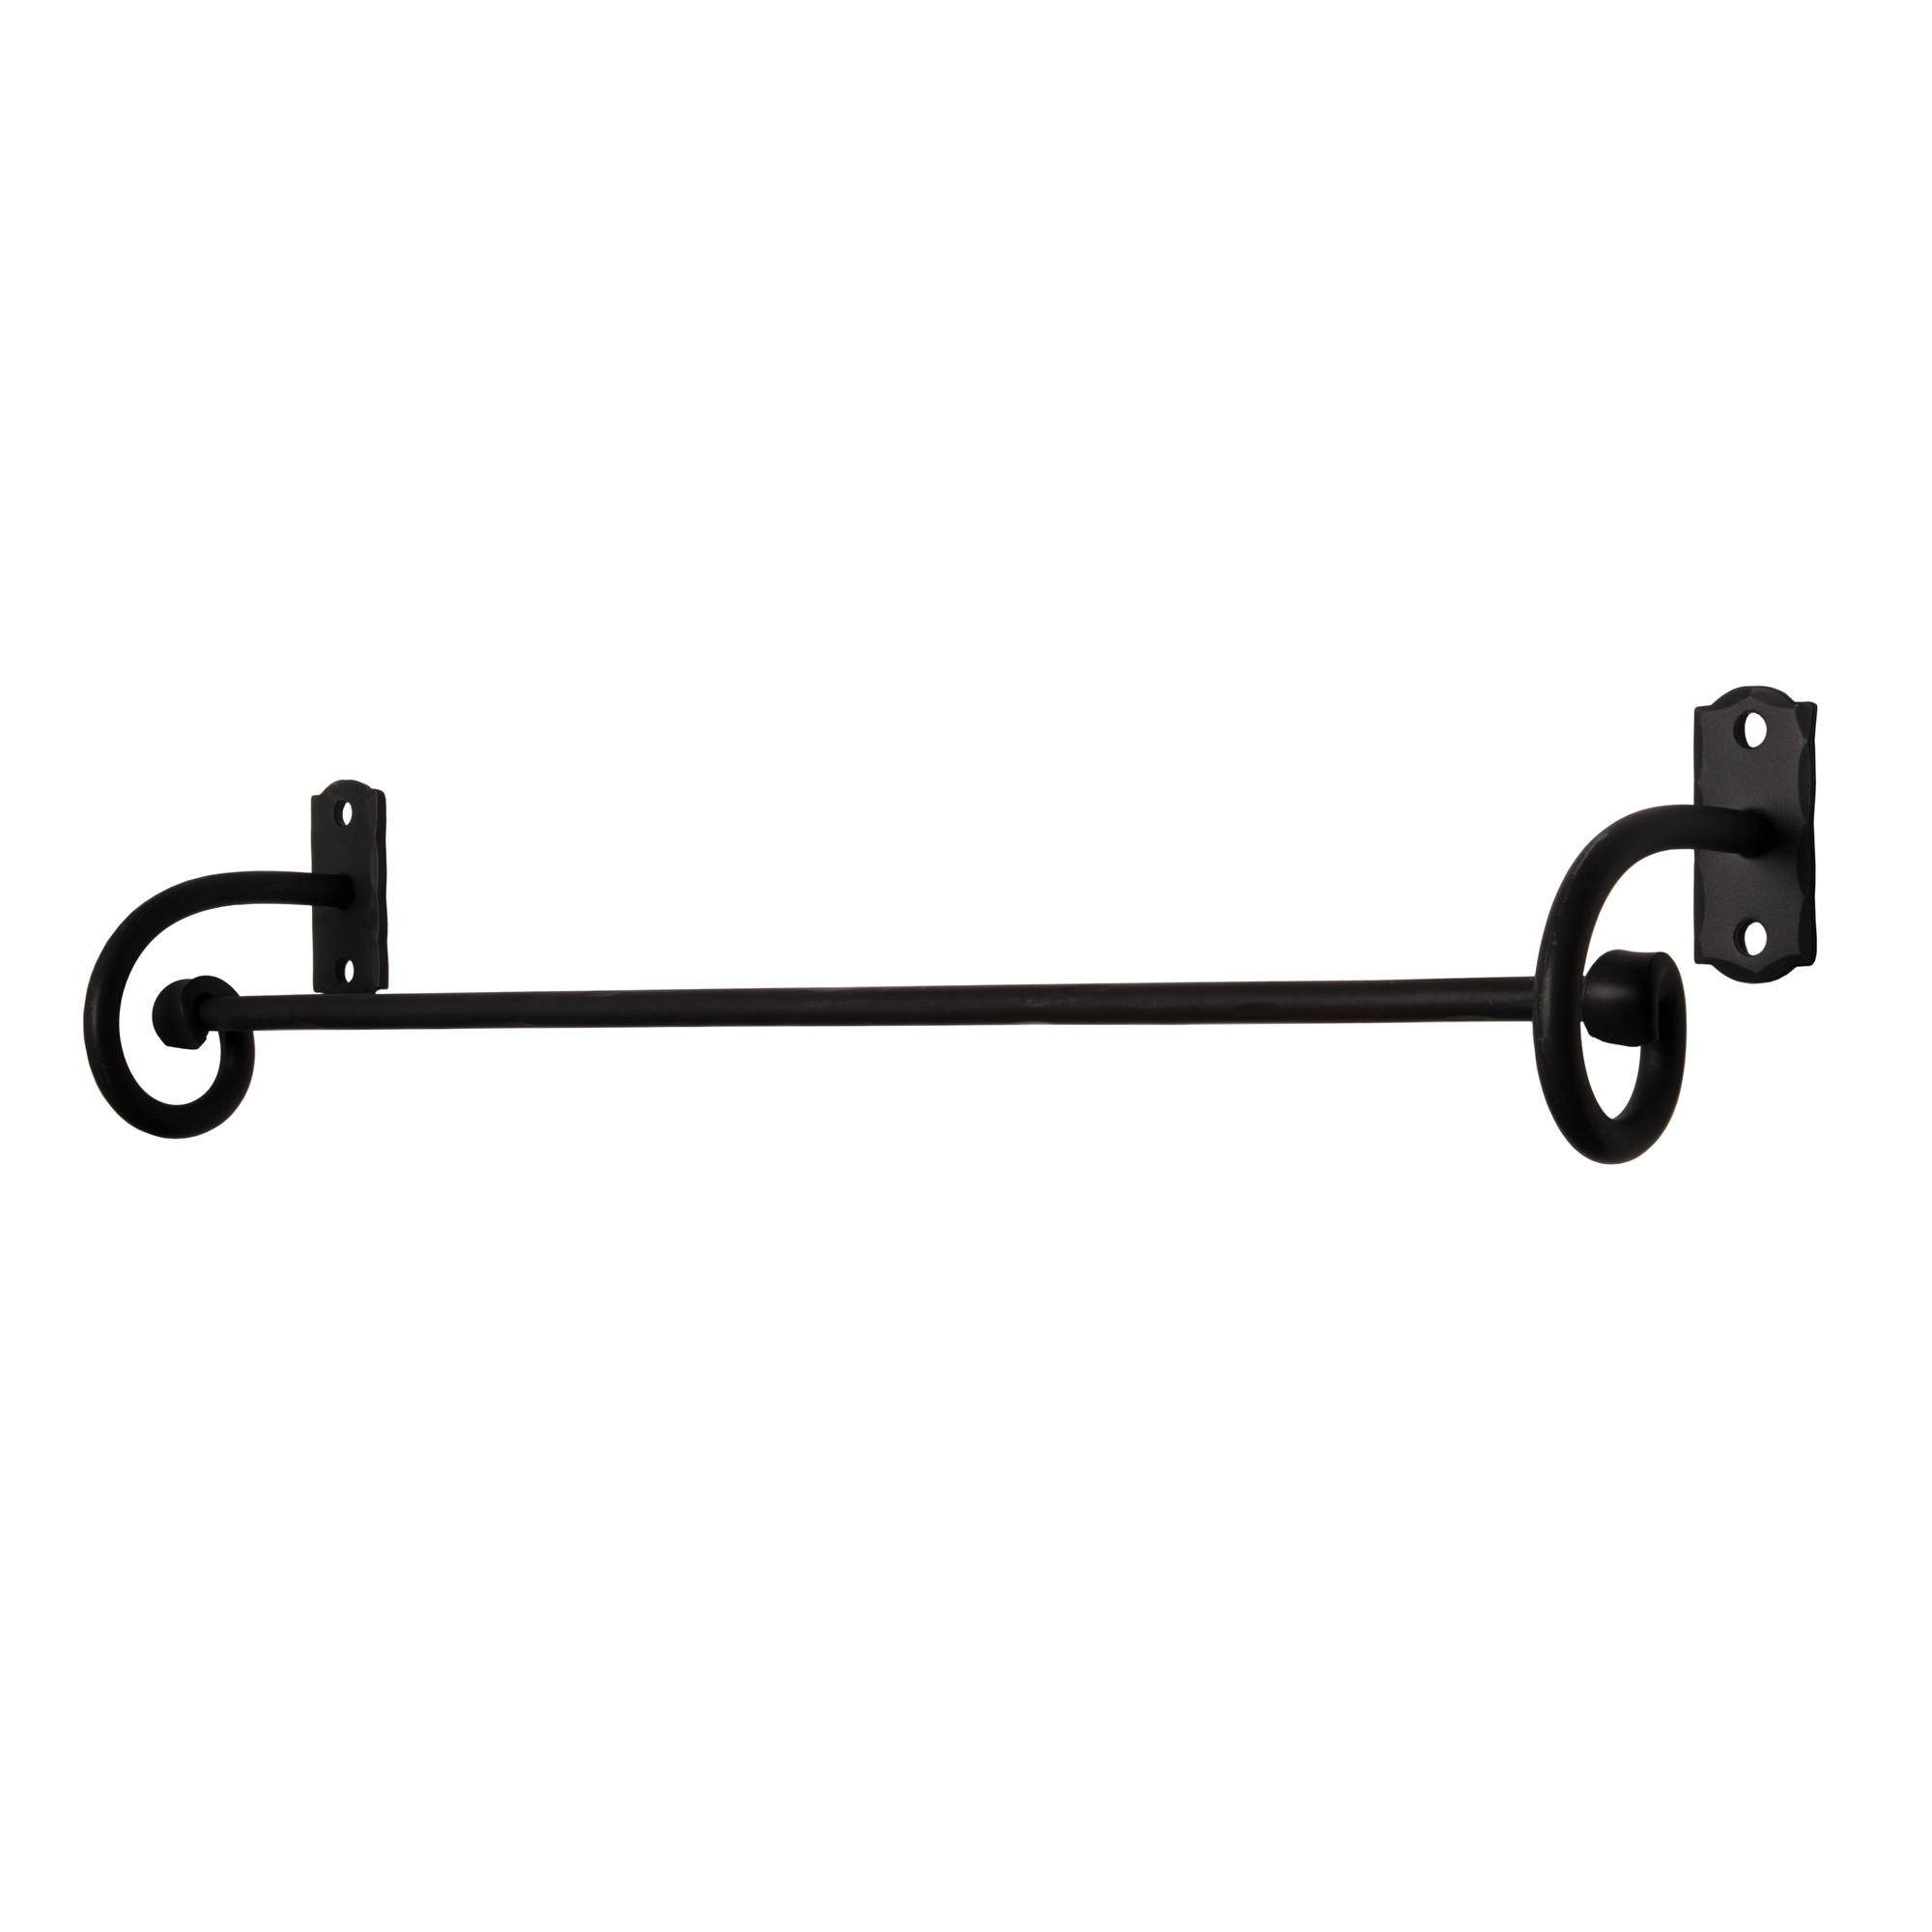 Wrought Iron Towel Bars | Hand-Forged in the USA